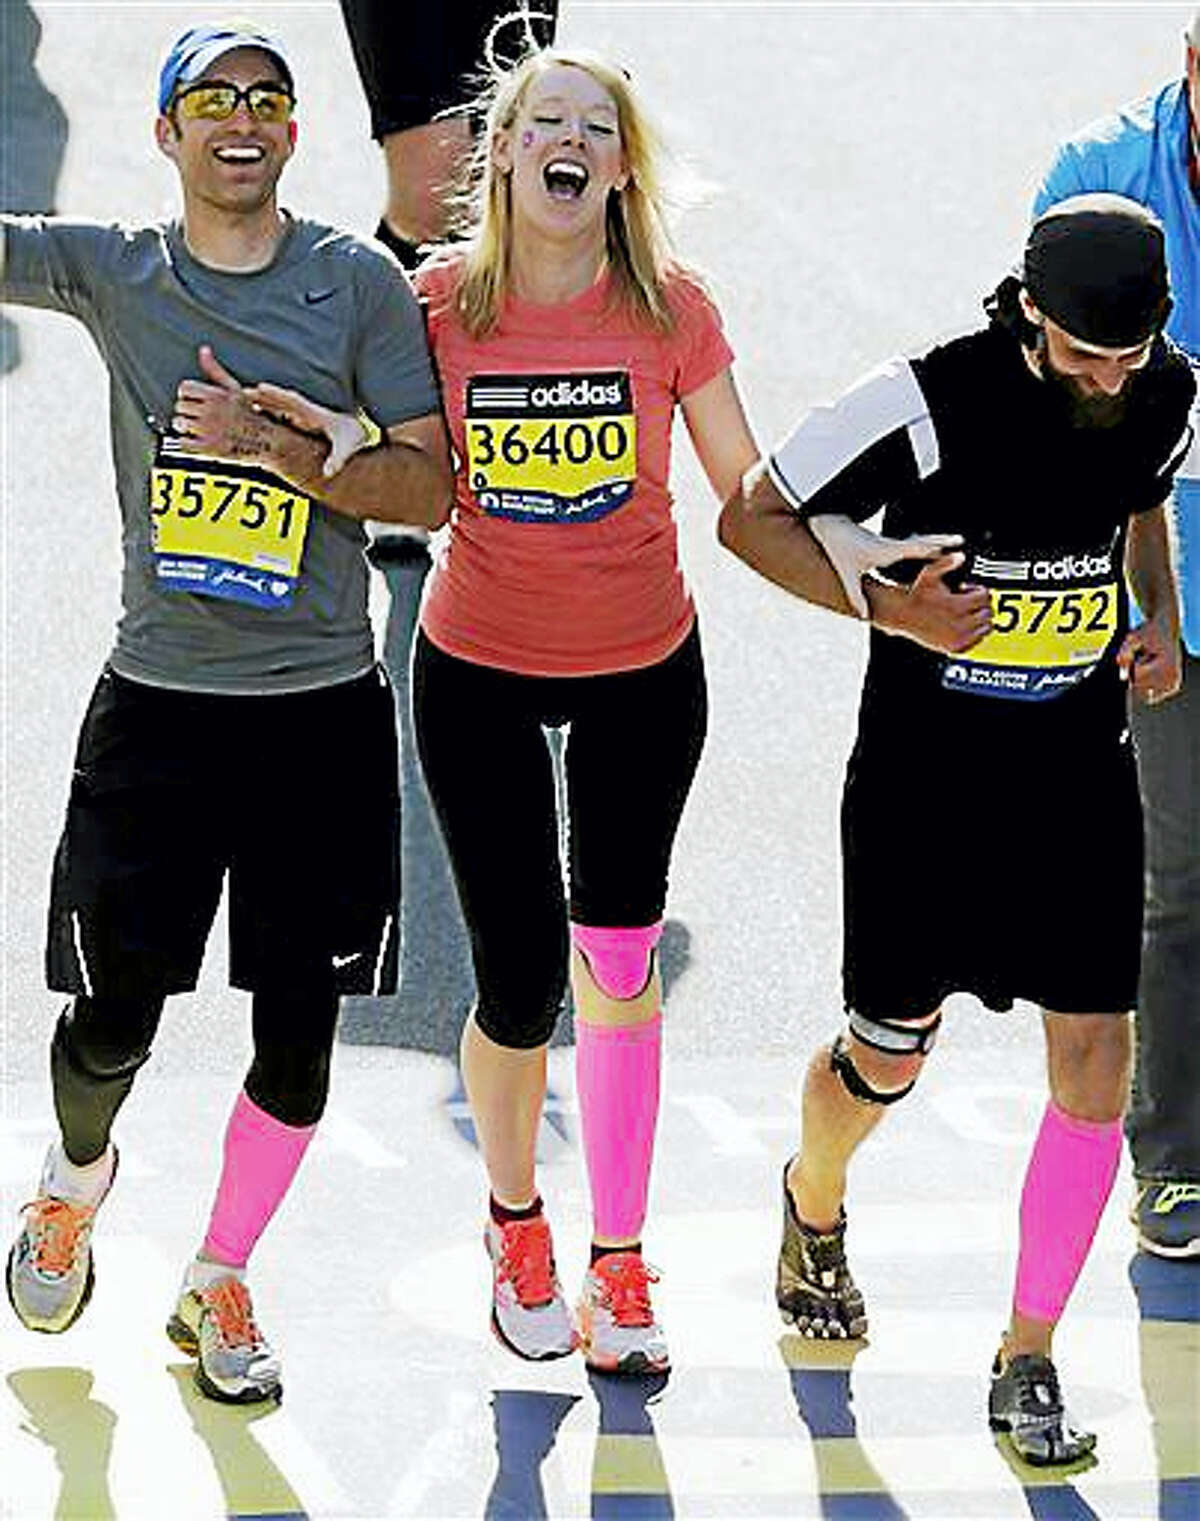 In this April 21, 2014, file photo, Timothy Haslet, left, and David Haslet, right, celebrate with their sister Adrianne Haslet-Davis at the finish line of the 118th Boston Marathon, after she completed a short distance of the course in Boston. Haslet-Davis said she is training to run the entire Boston Marathon on Monday, April 18, 2016. Haslet-Davis lost her left leg below the knee in the April 2013 bombing attacks, which killed three people and wounded more than 260 others.